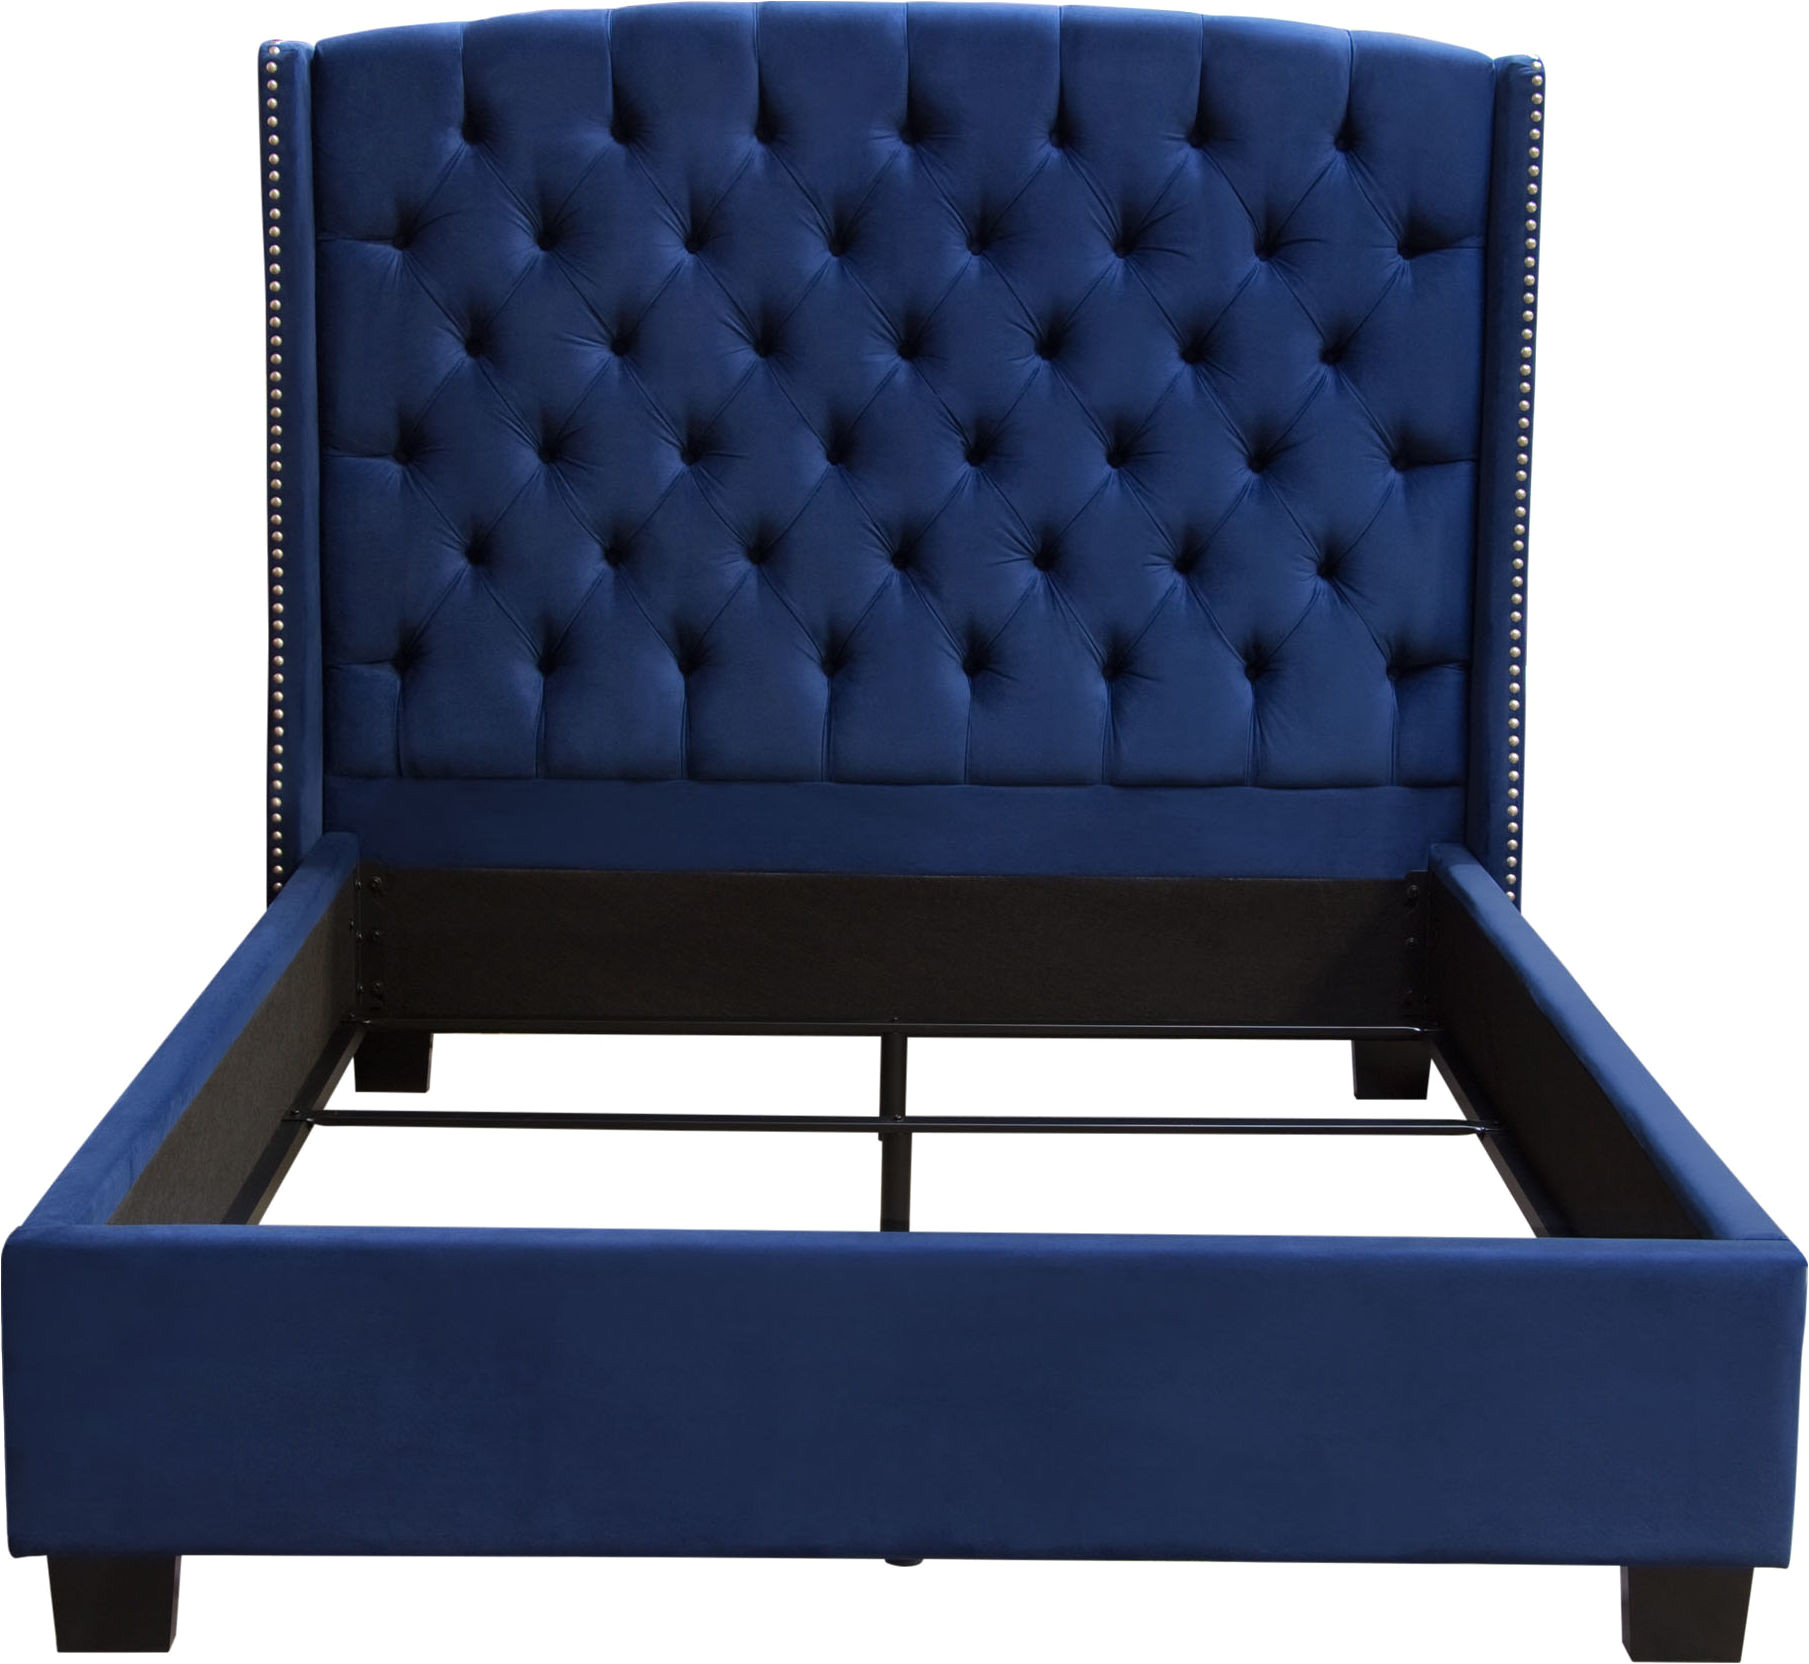 majestic eastern king tufted bed in royal navy velvet with nail head wing accents